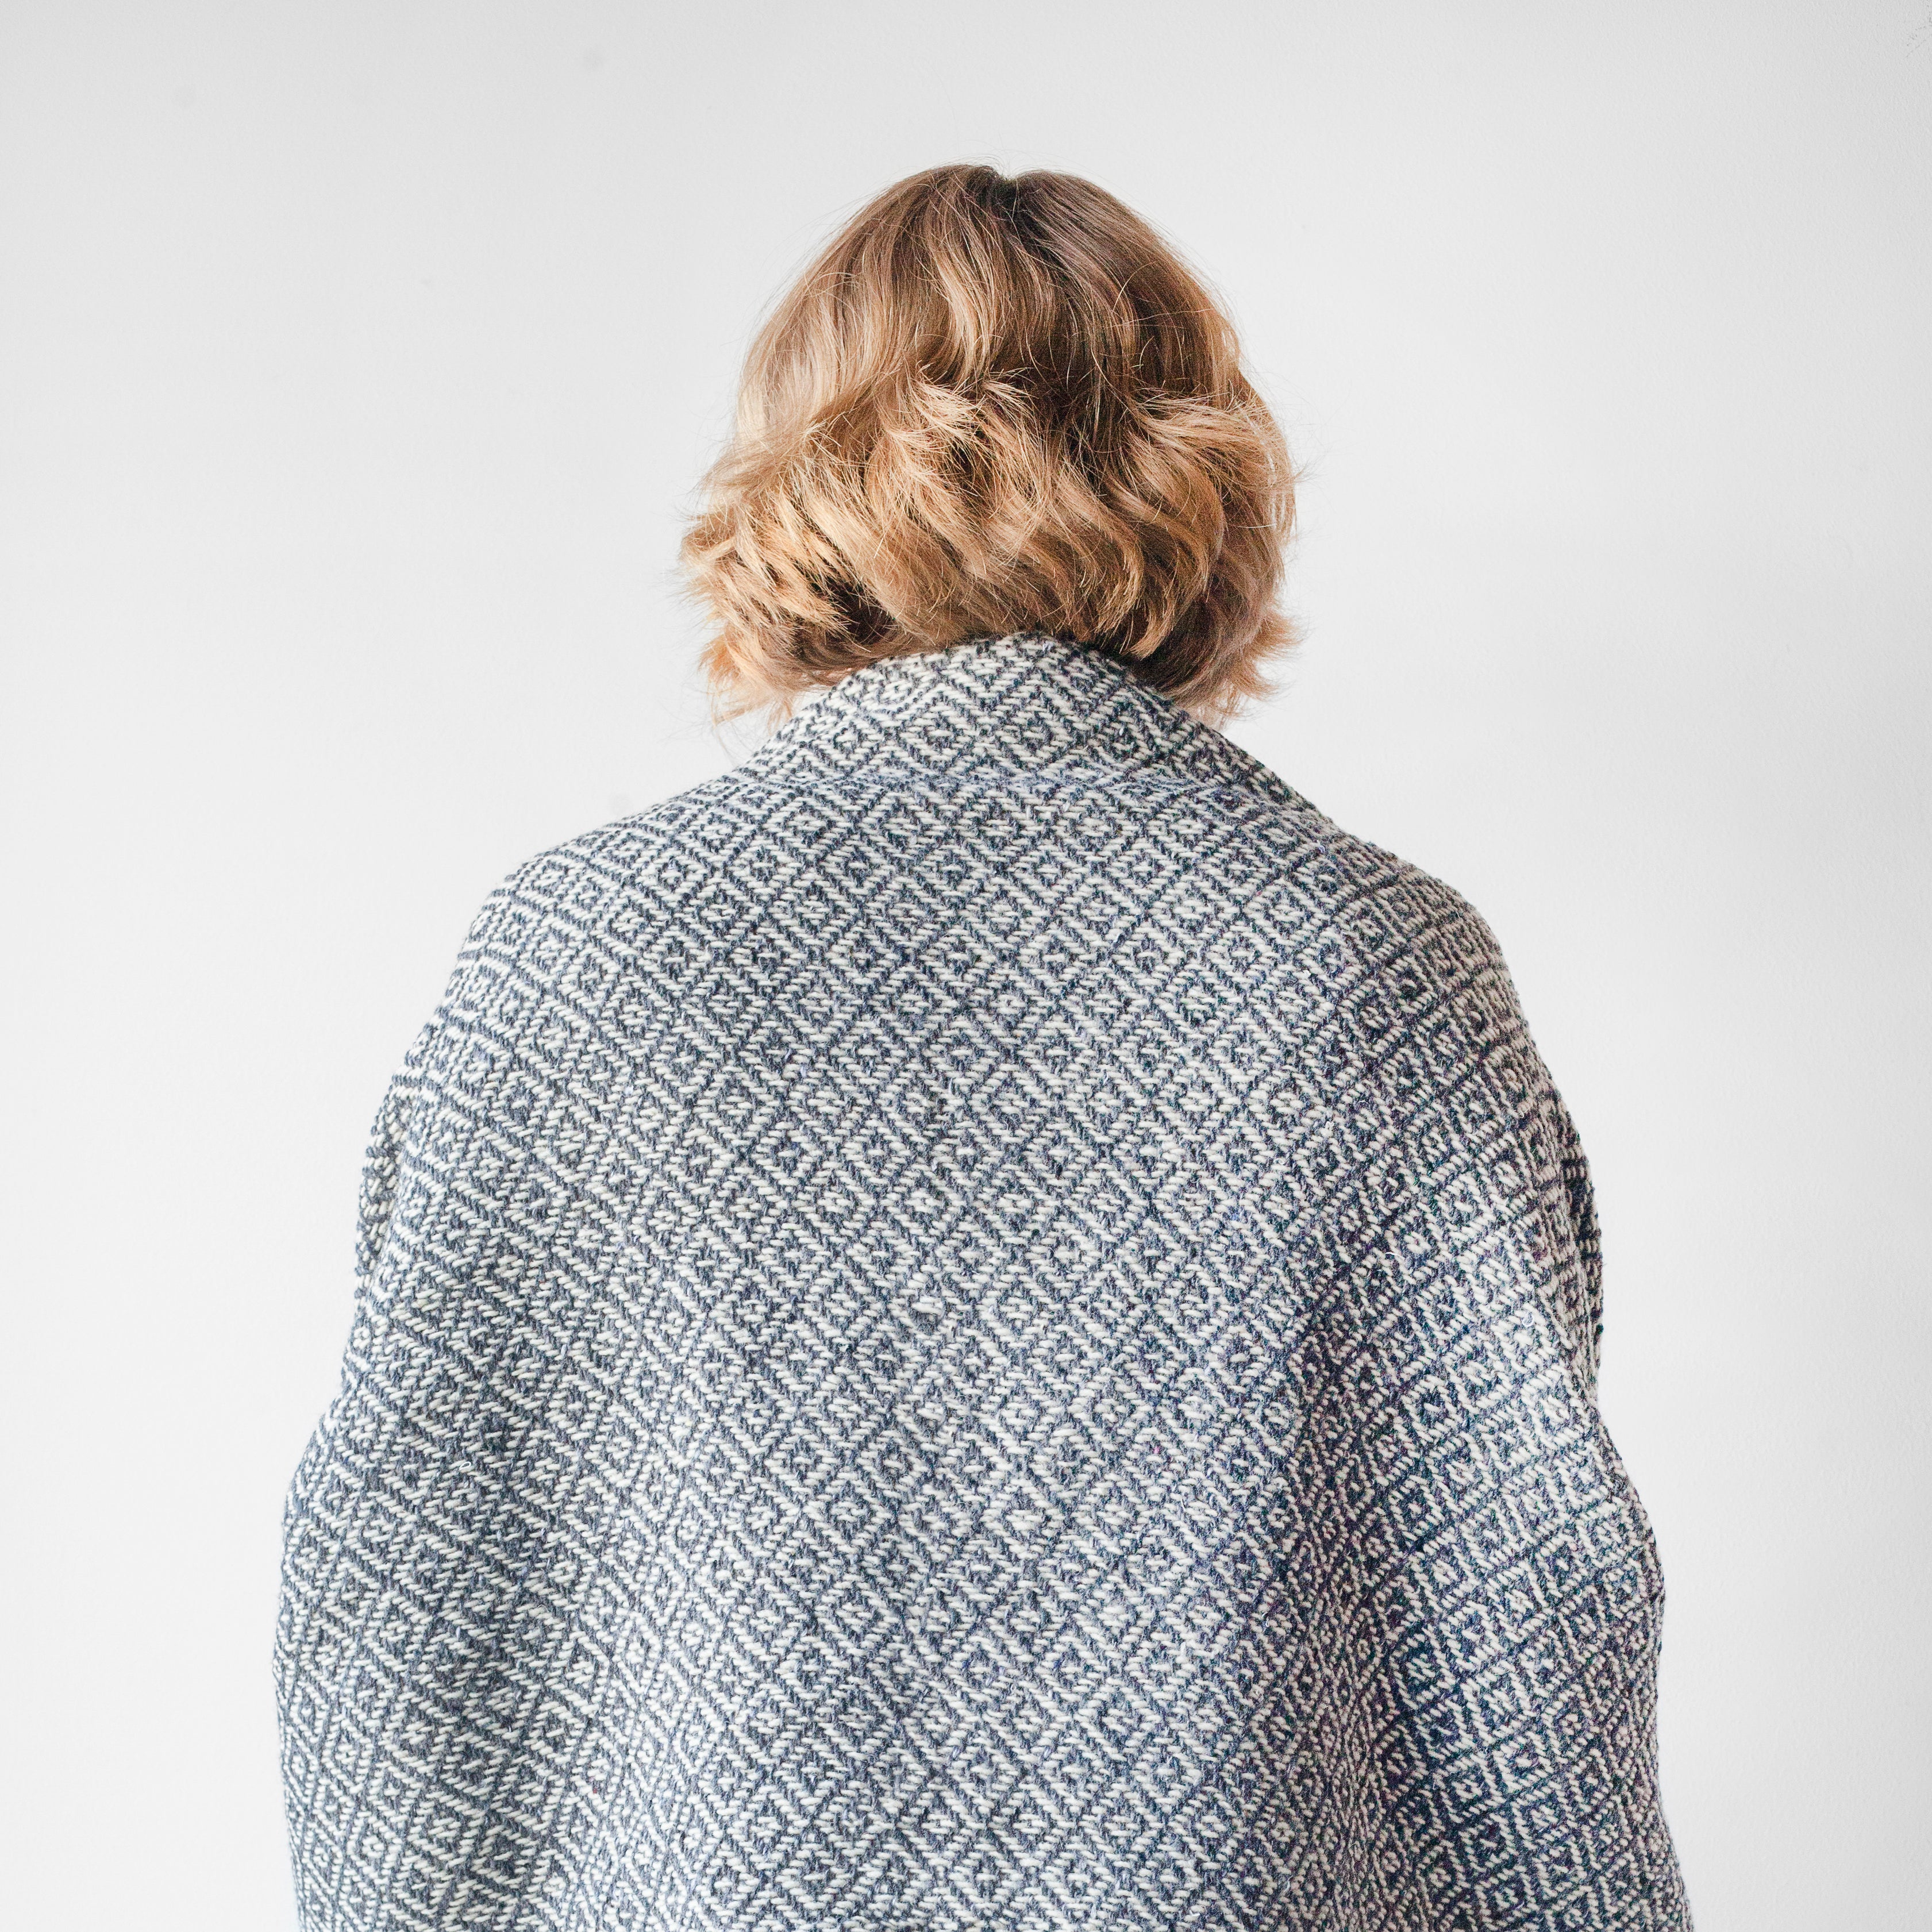 Charcoal grey and white wool throw blanket woven in diamond pattern being worn over the shoulders as a shawl